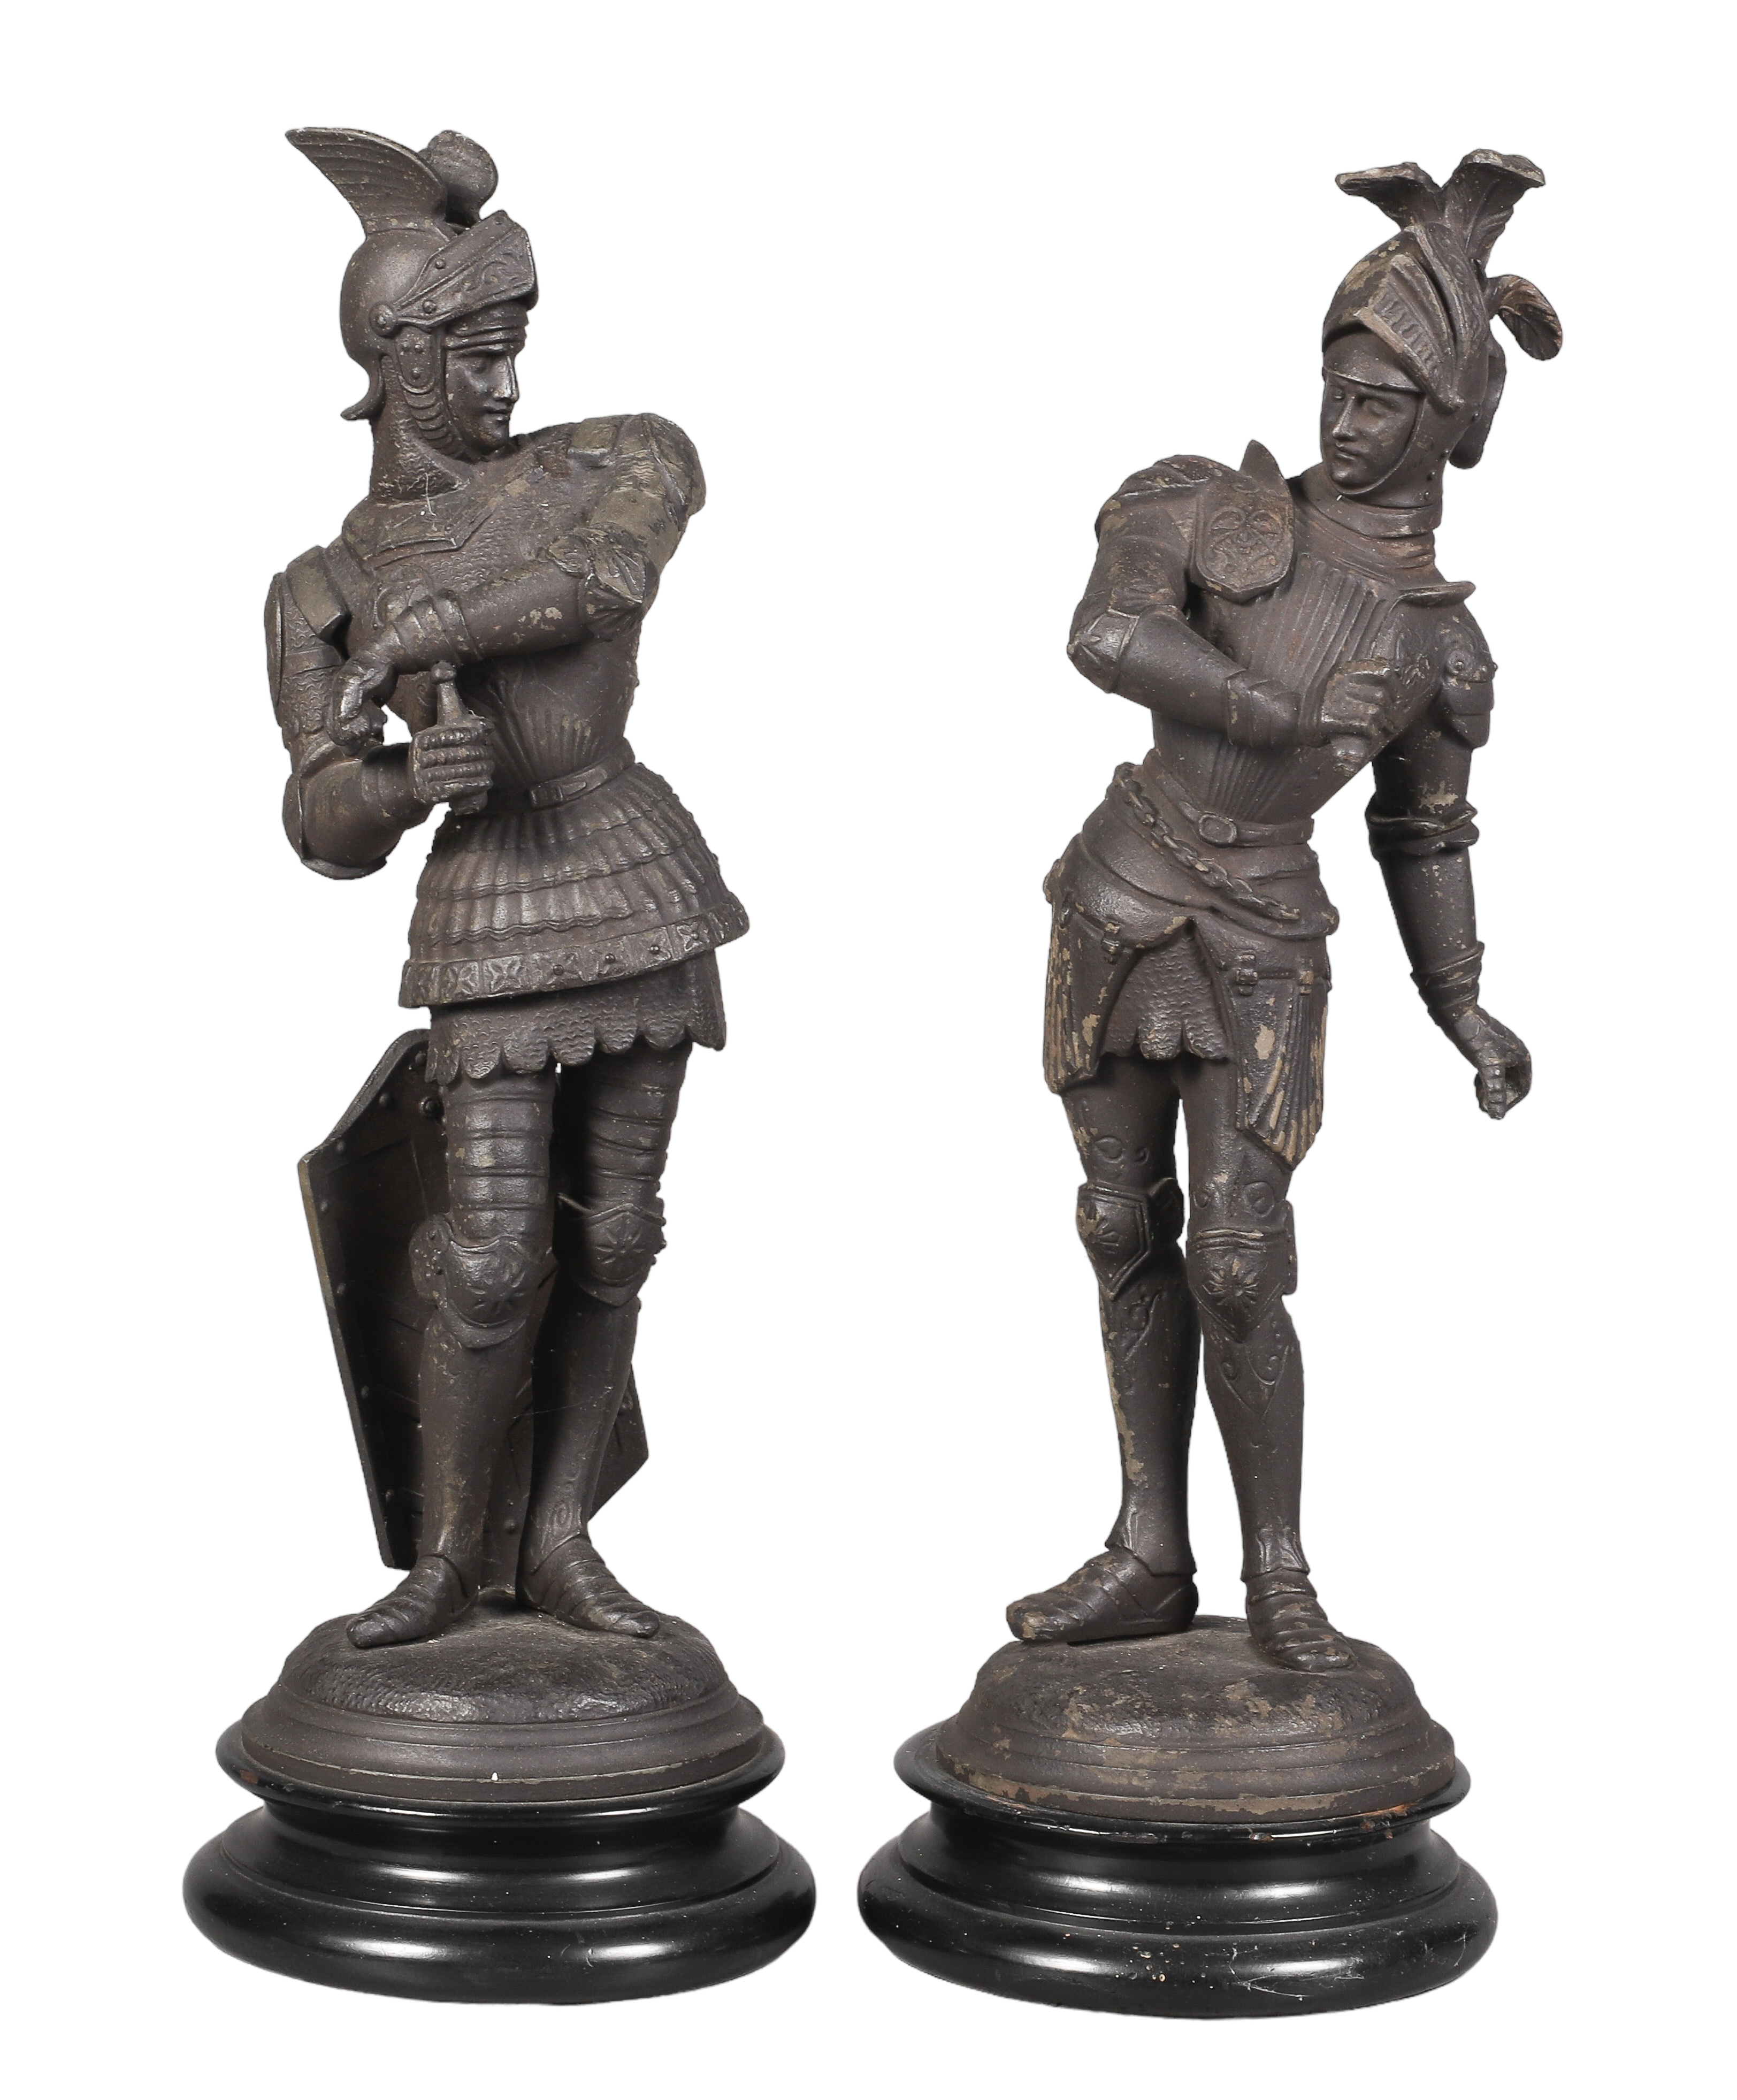 Patinated white metal soldier figure